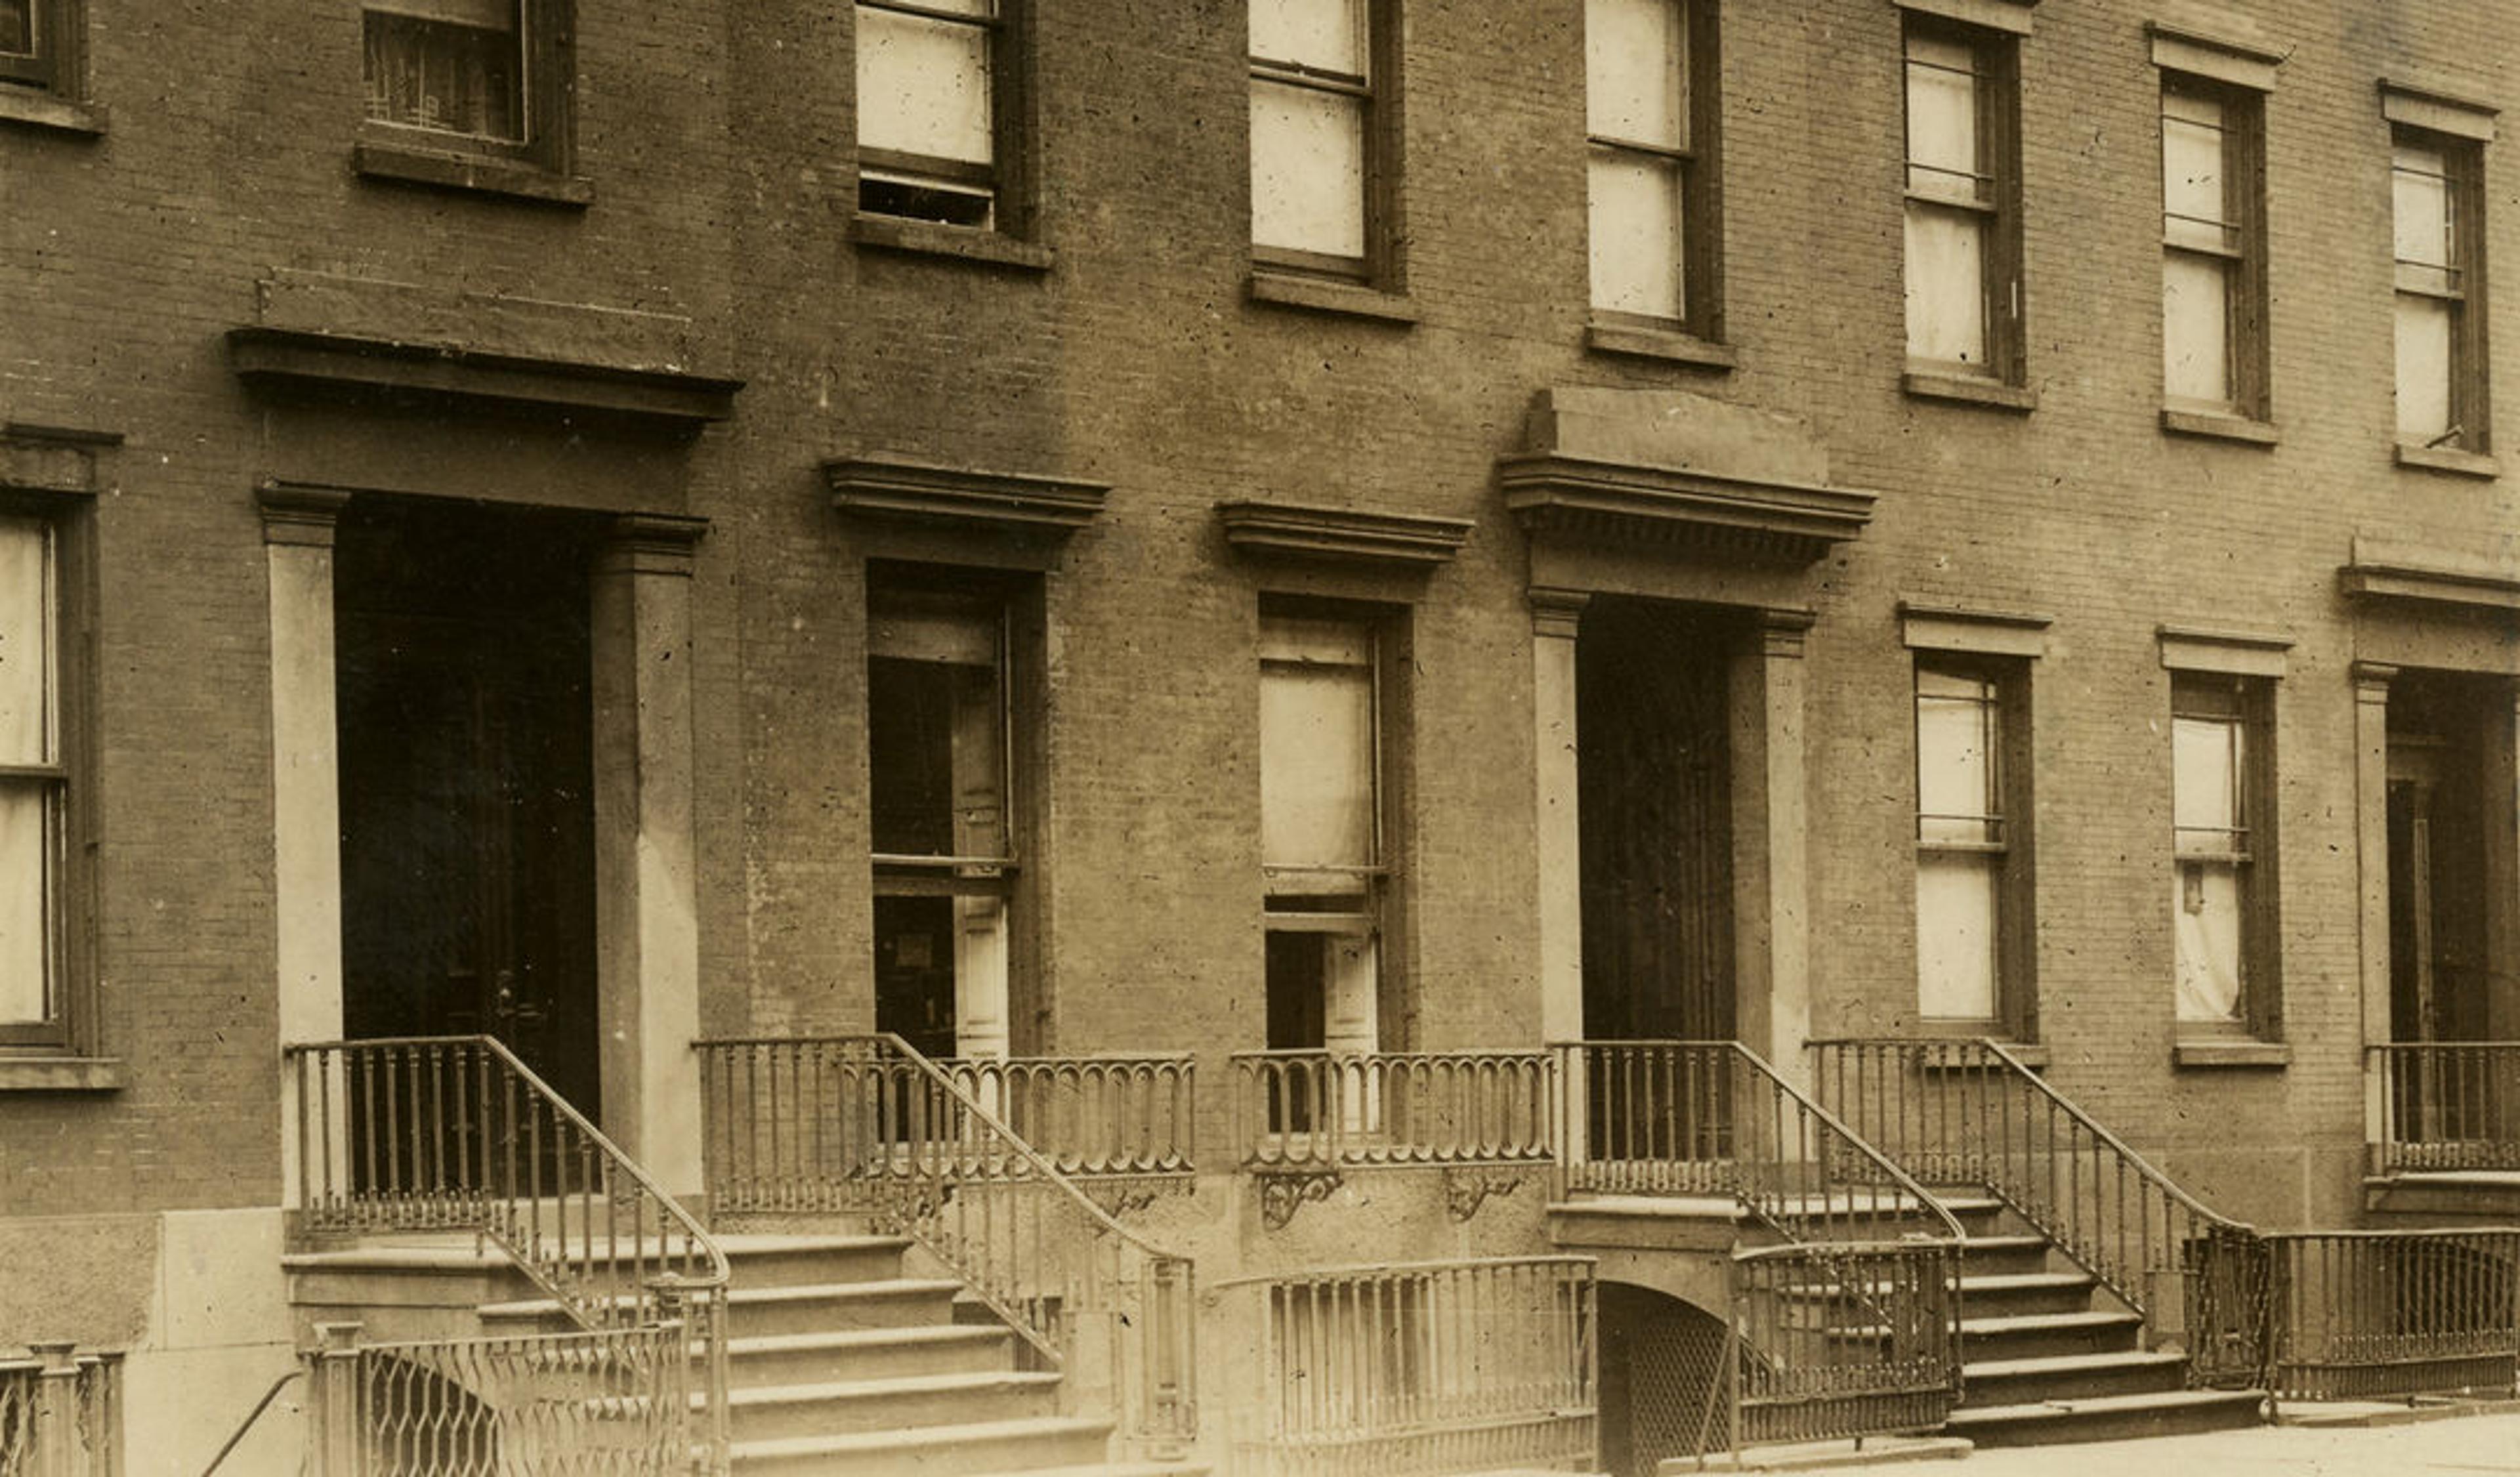 Photograph of apartment building